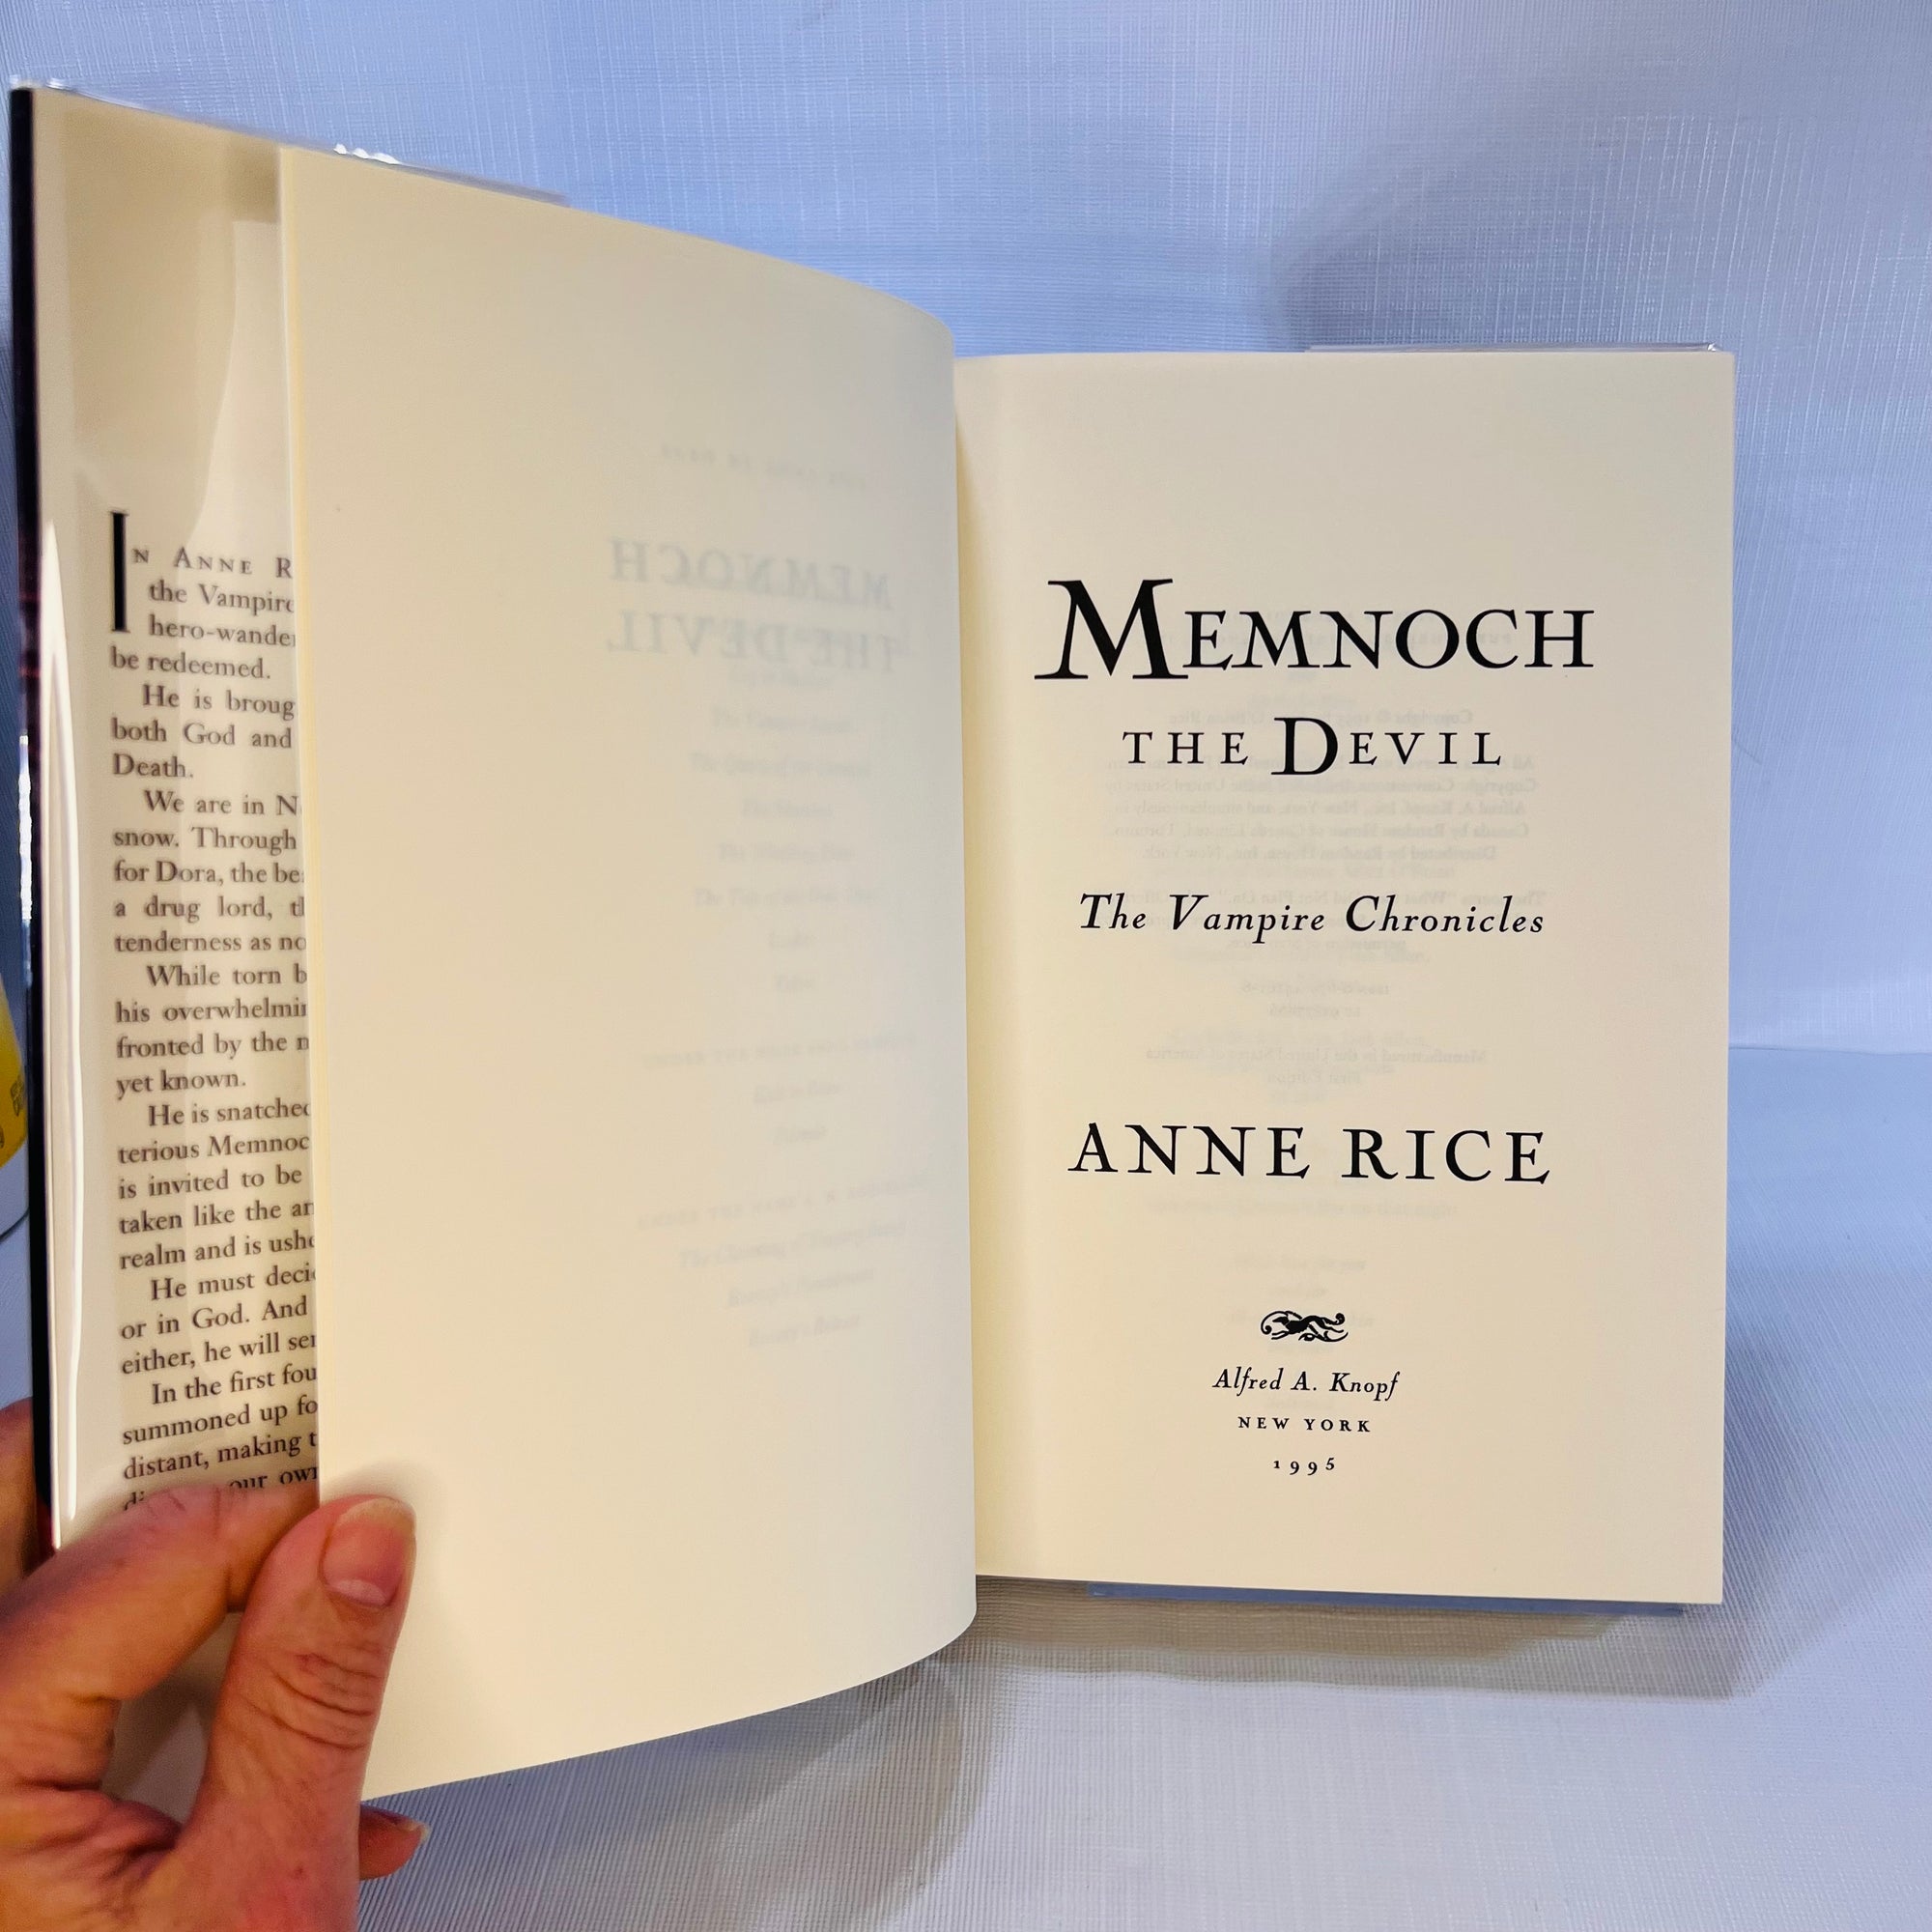 Memnoch the Devil by Anne Rice The Vampire Chronicles 1995 First Edition Alfred A. Knopf